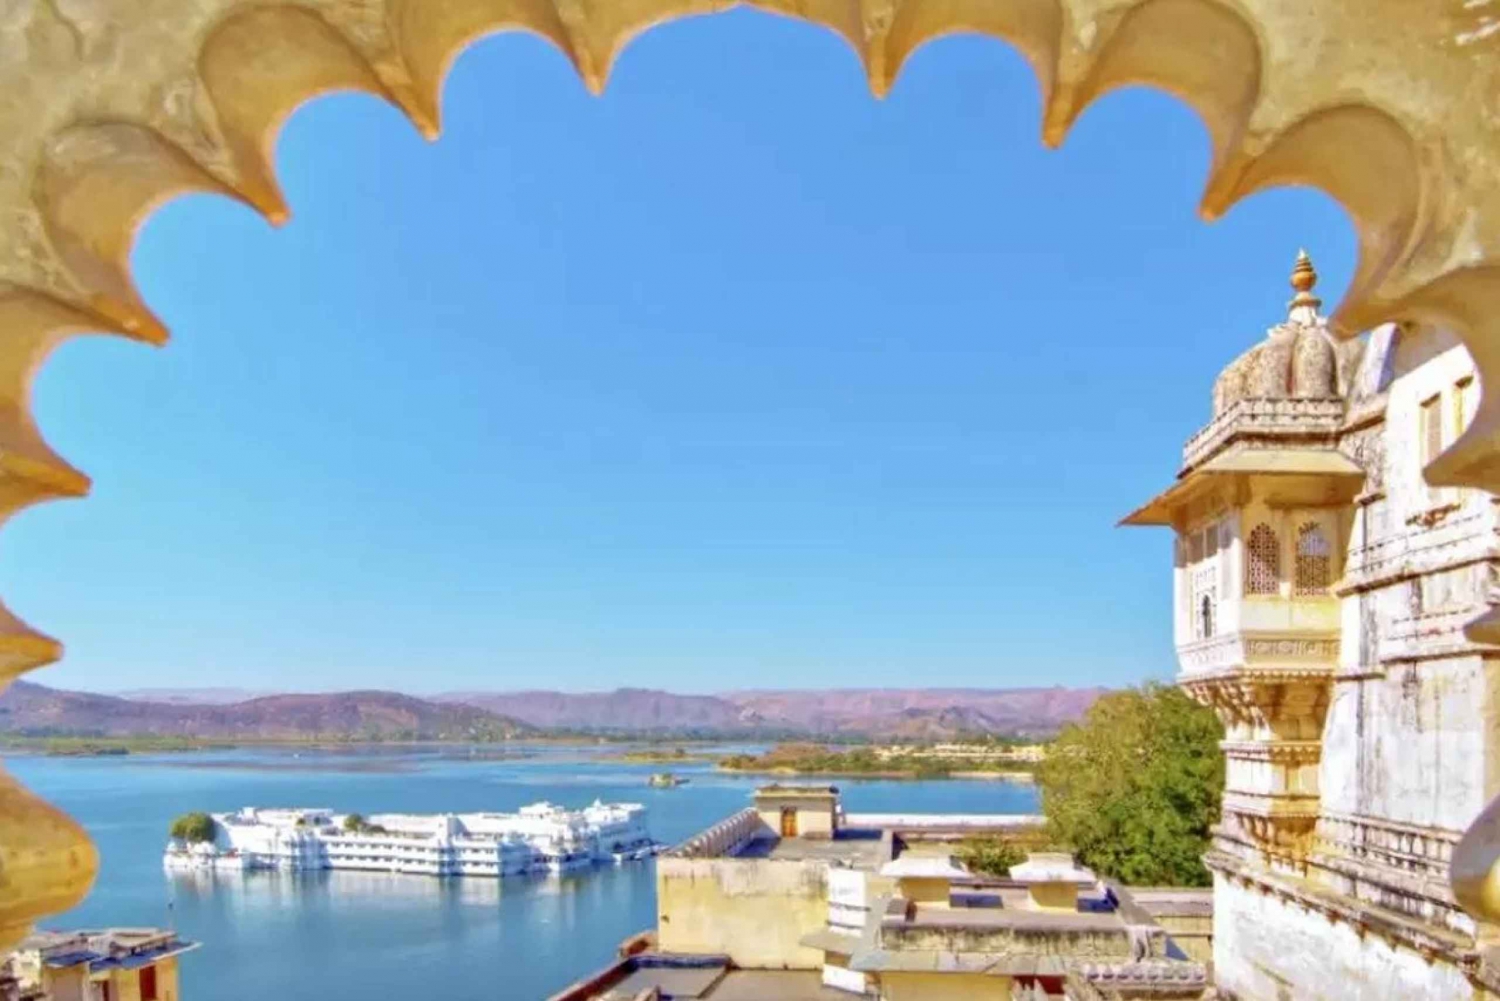 From Udaipur: Private Udaipur City Sightseeing Tour by Car